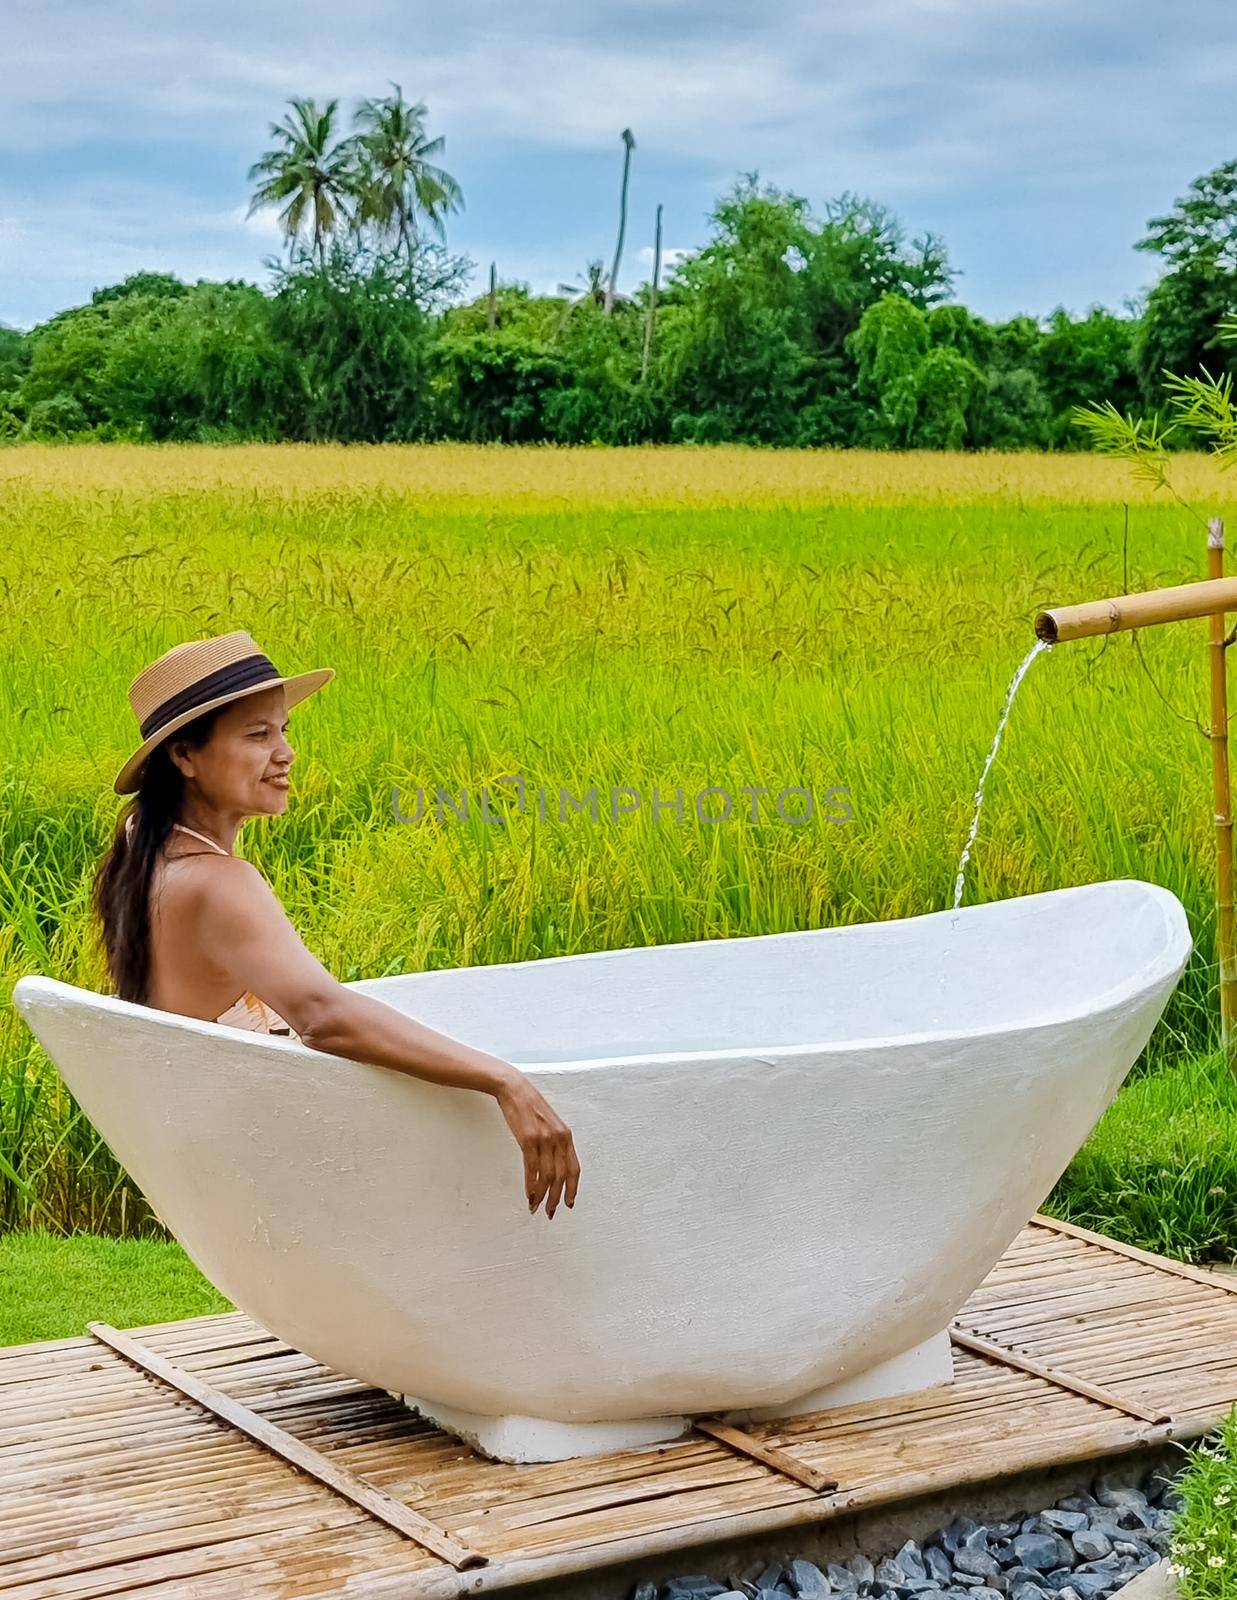 Eco farm homestay with a rice field in central Thailand, paddy field of rice during rain monsoon season in Thailand. Asian woman at a homestay farm in Thailand, woman taking a bath outside